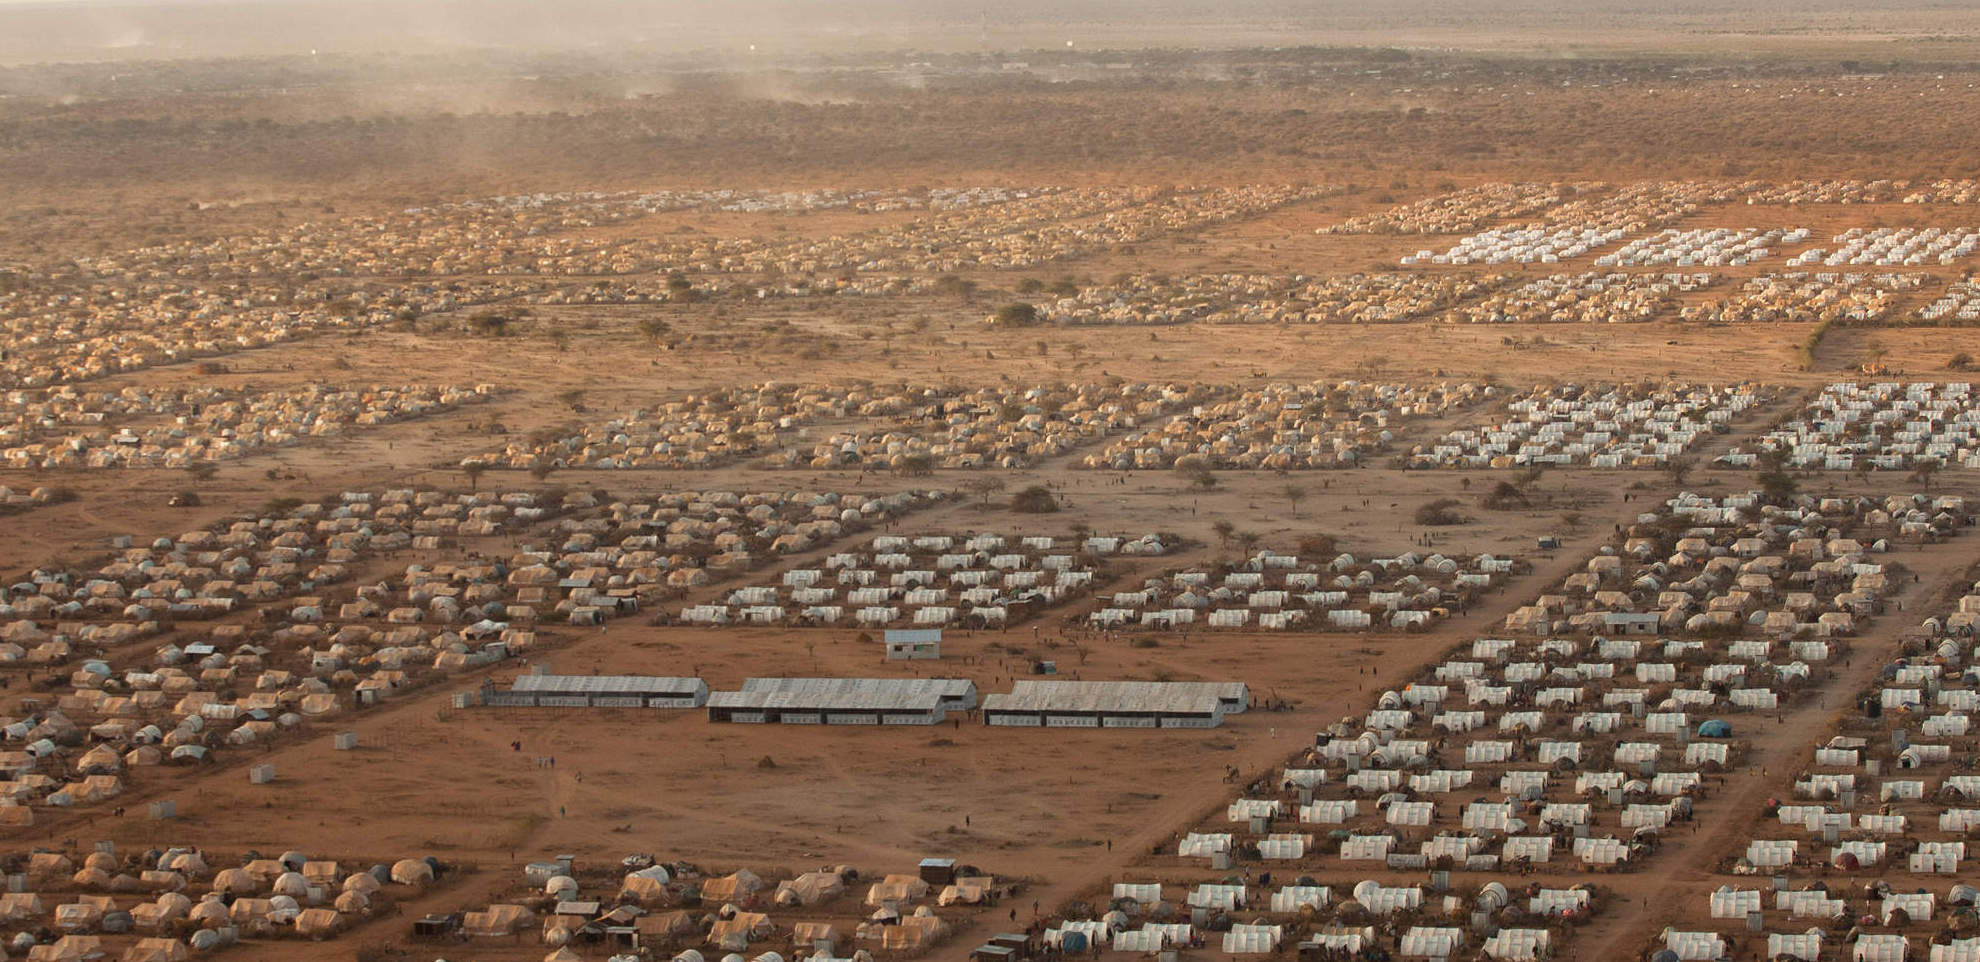 The Camp and the City: A panel on Architectures of Refuge